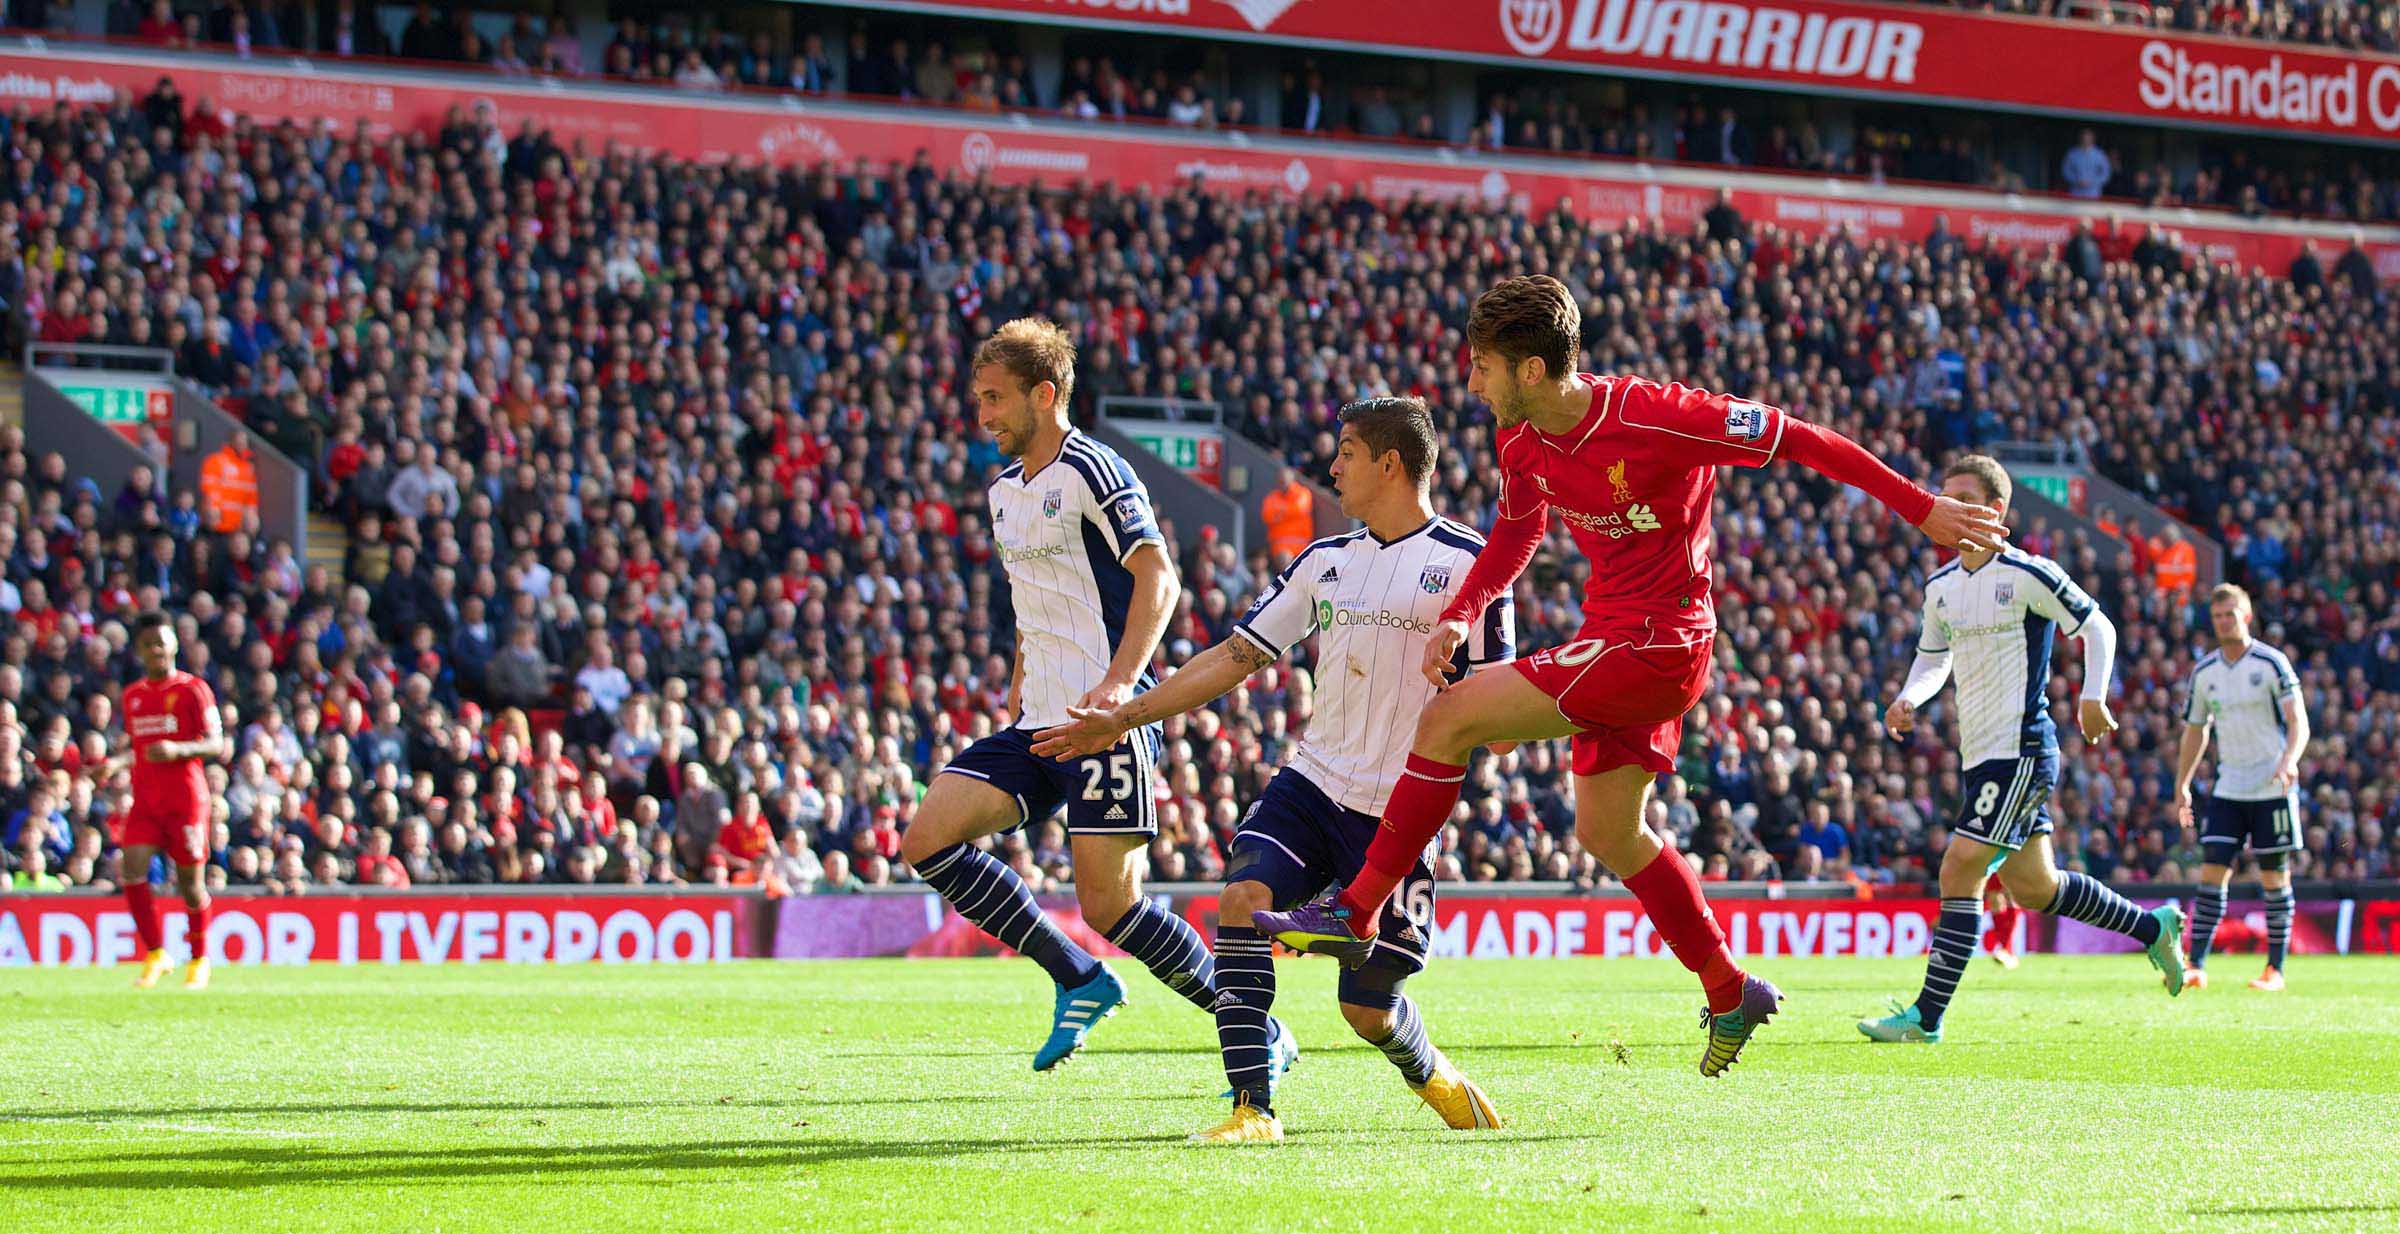 NEIL ATKINSON’S MATCH REVIEW: LIVERPOOL 2 WEST BROM 1